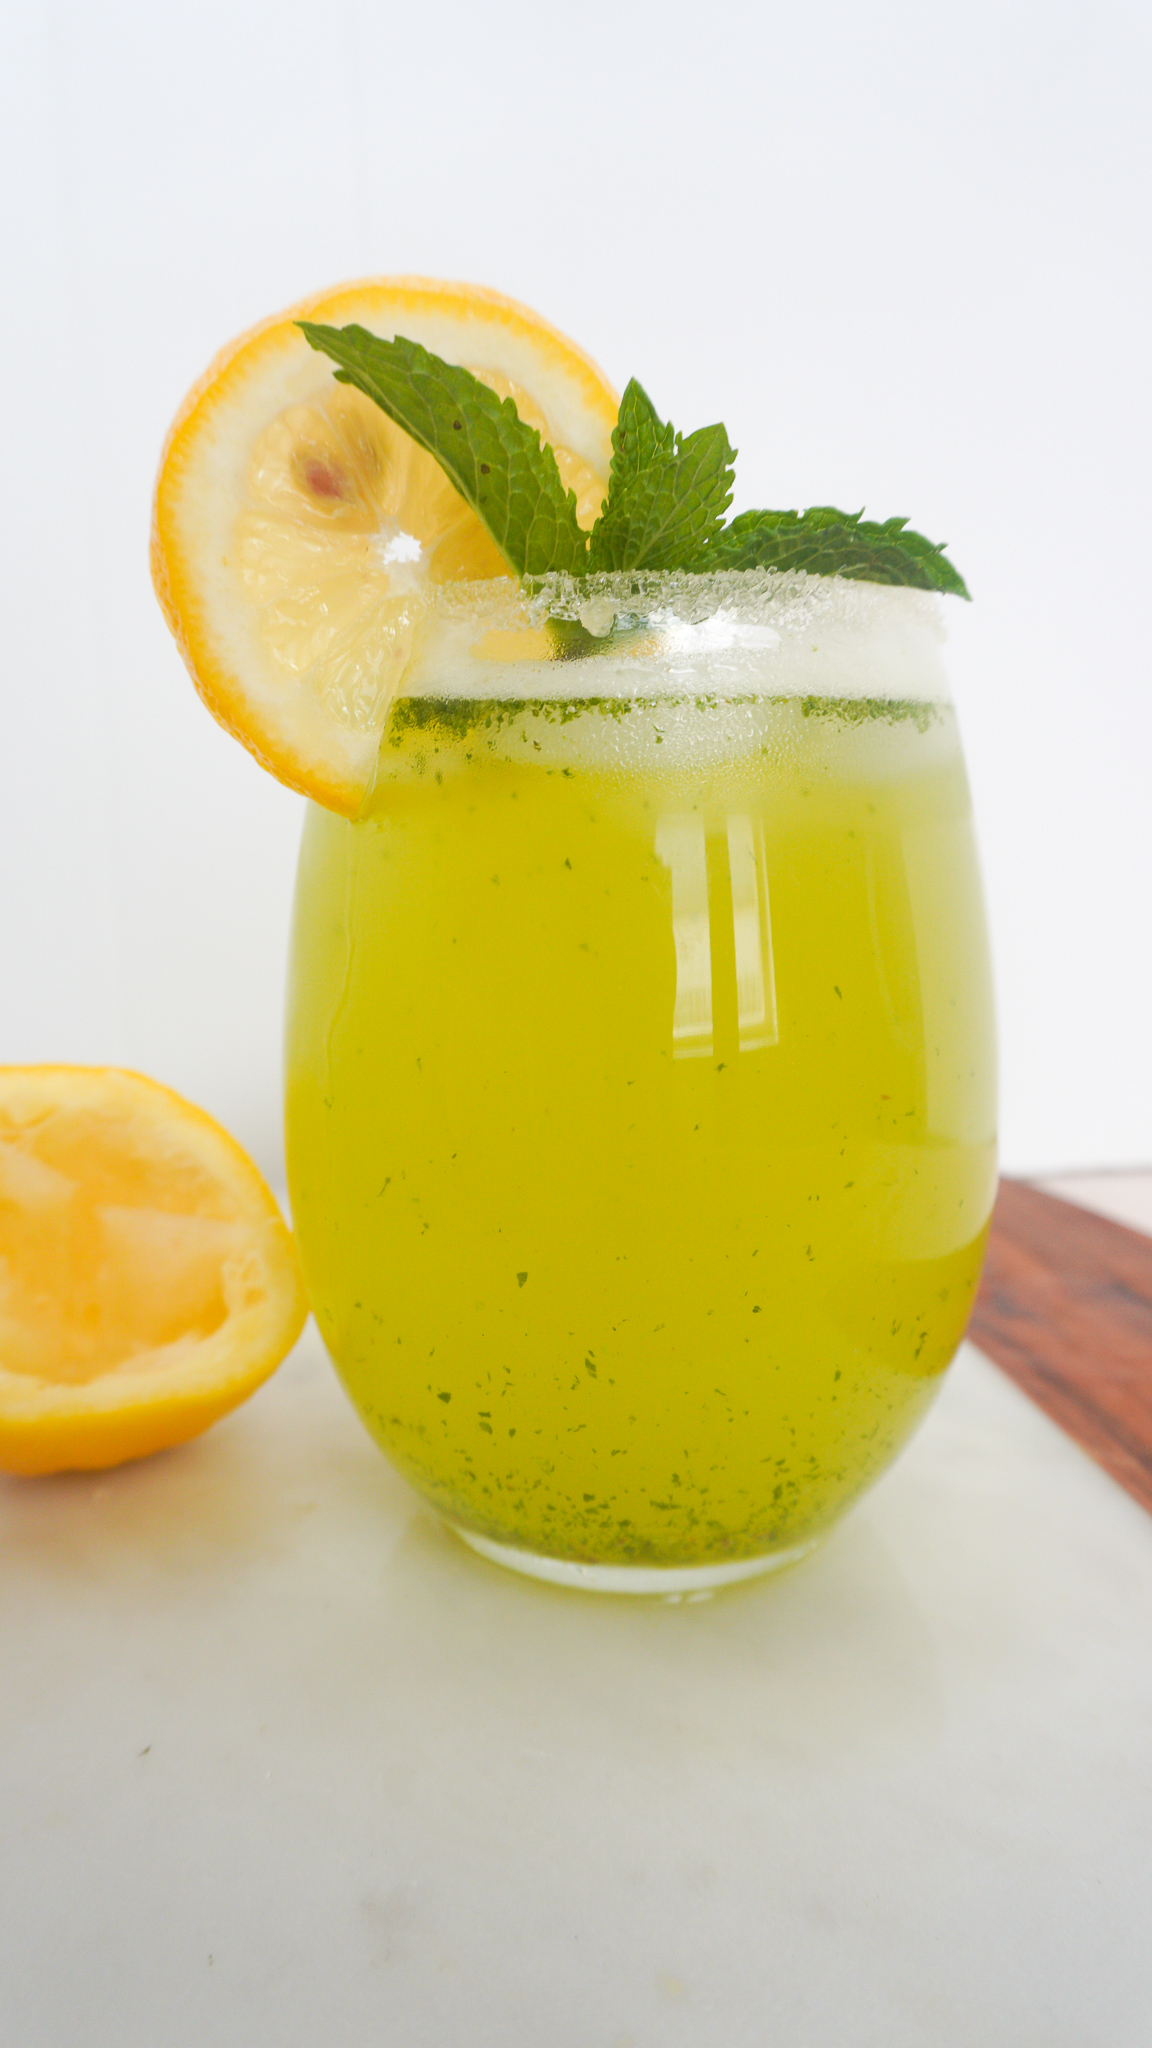 Lemon mint drink in glass with lemon and mint garnish